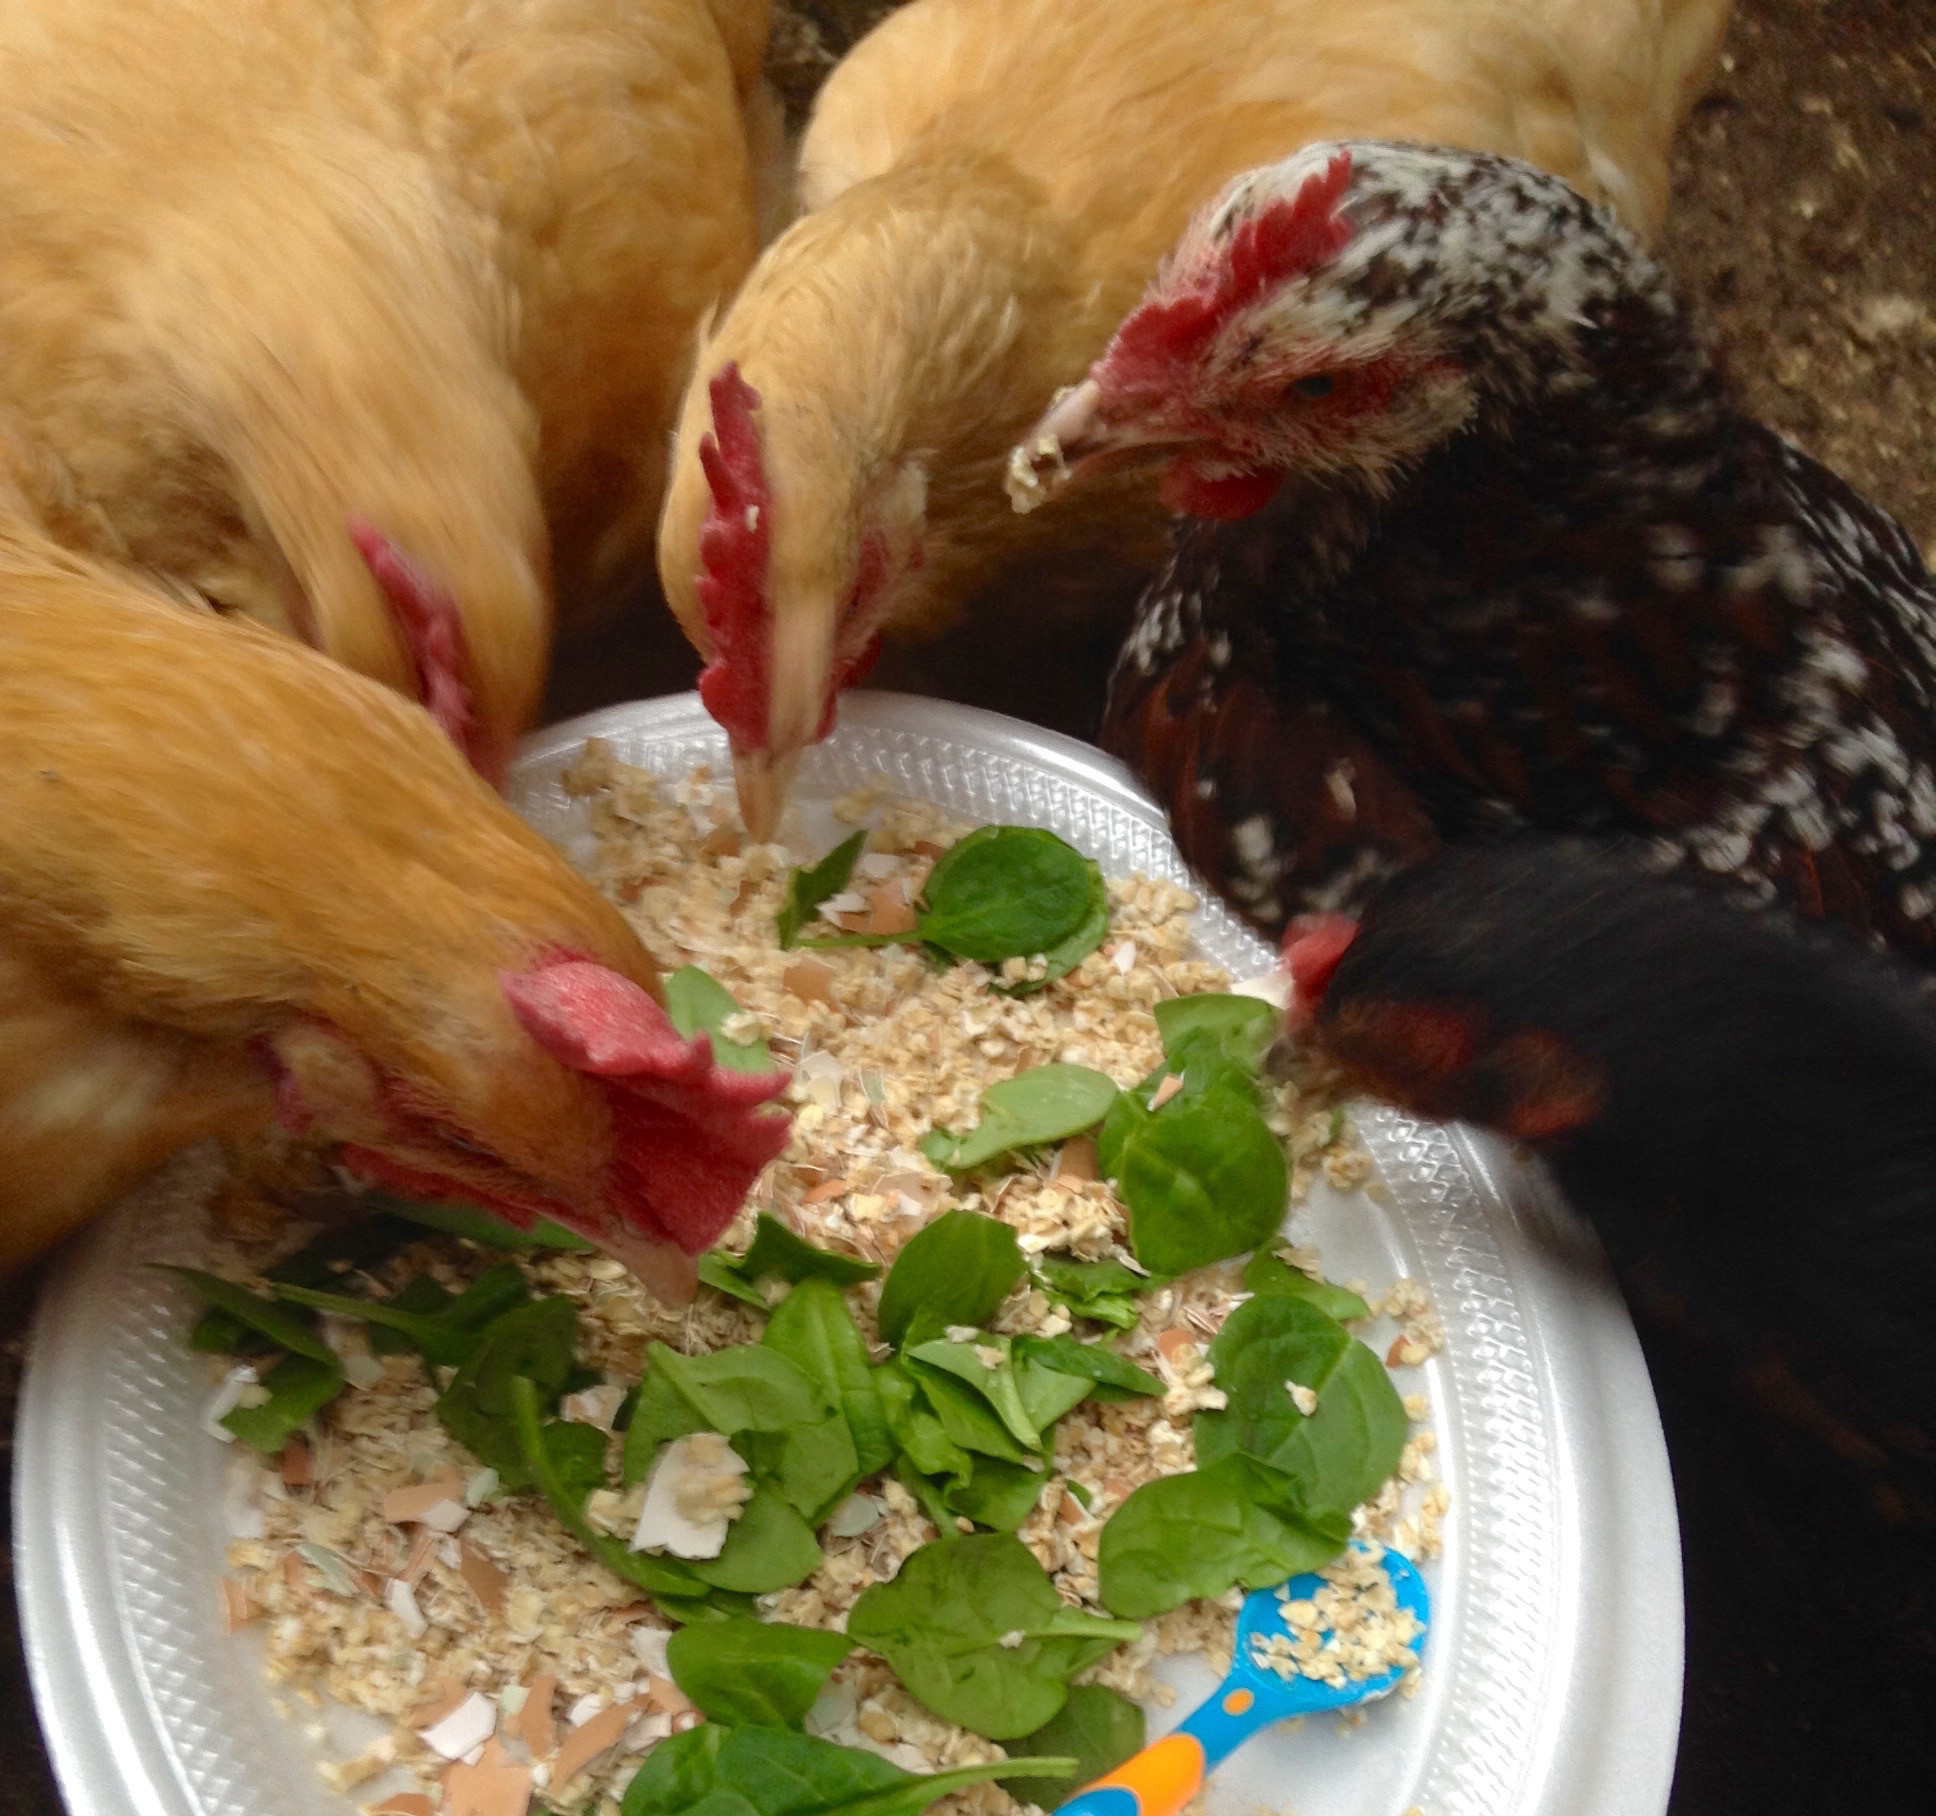 11 Awesome Reasons Why You Should Keep Chickens As Pets (Updated Dec. 2021)